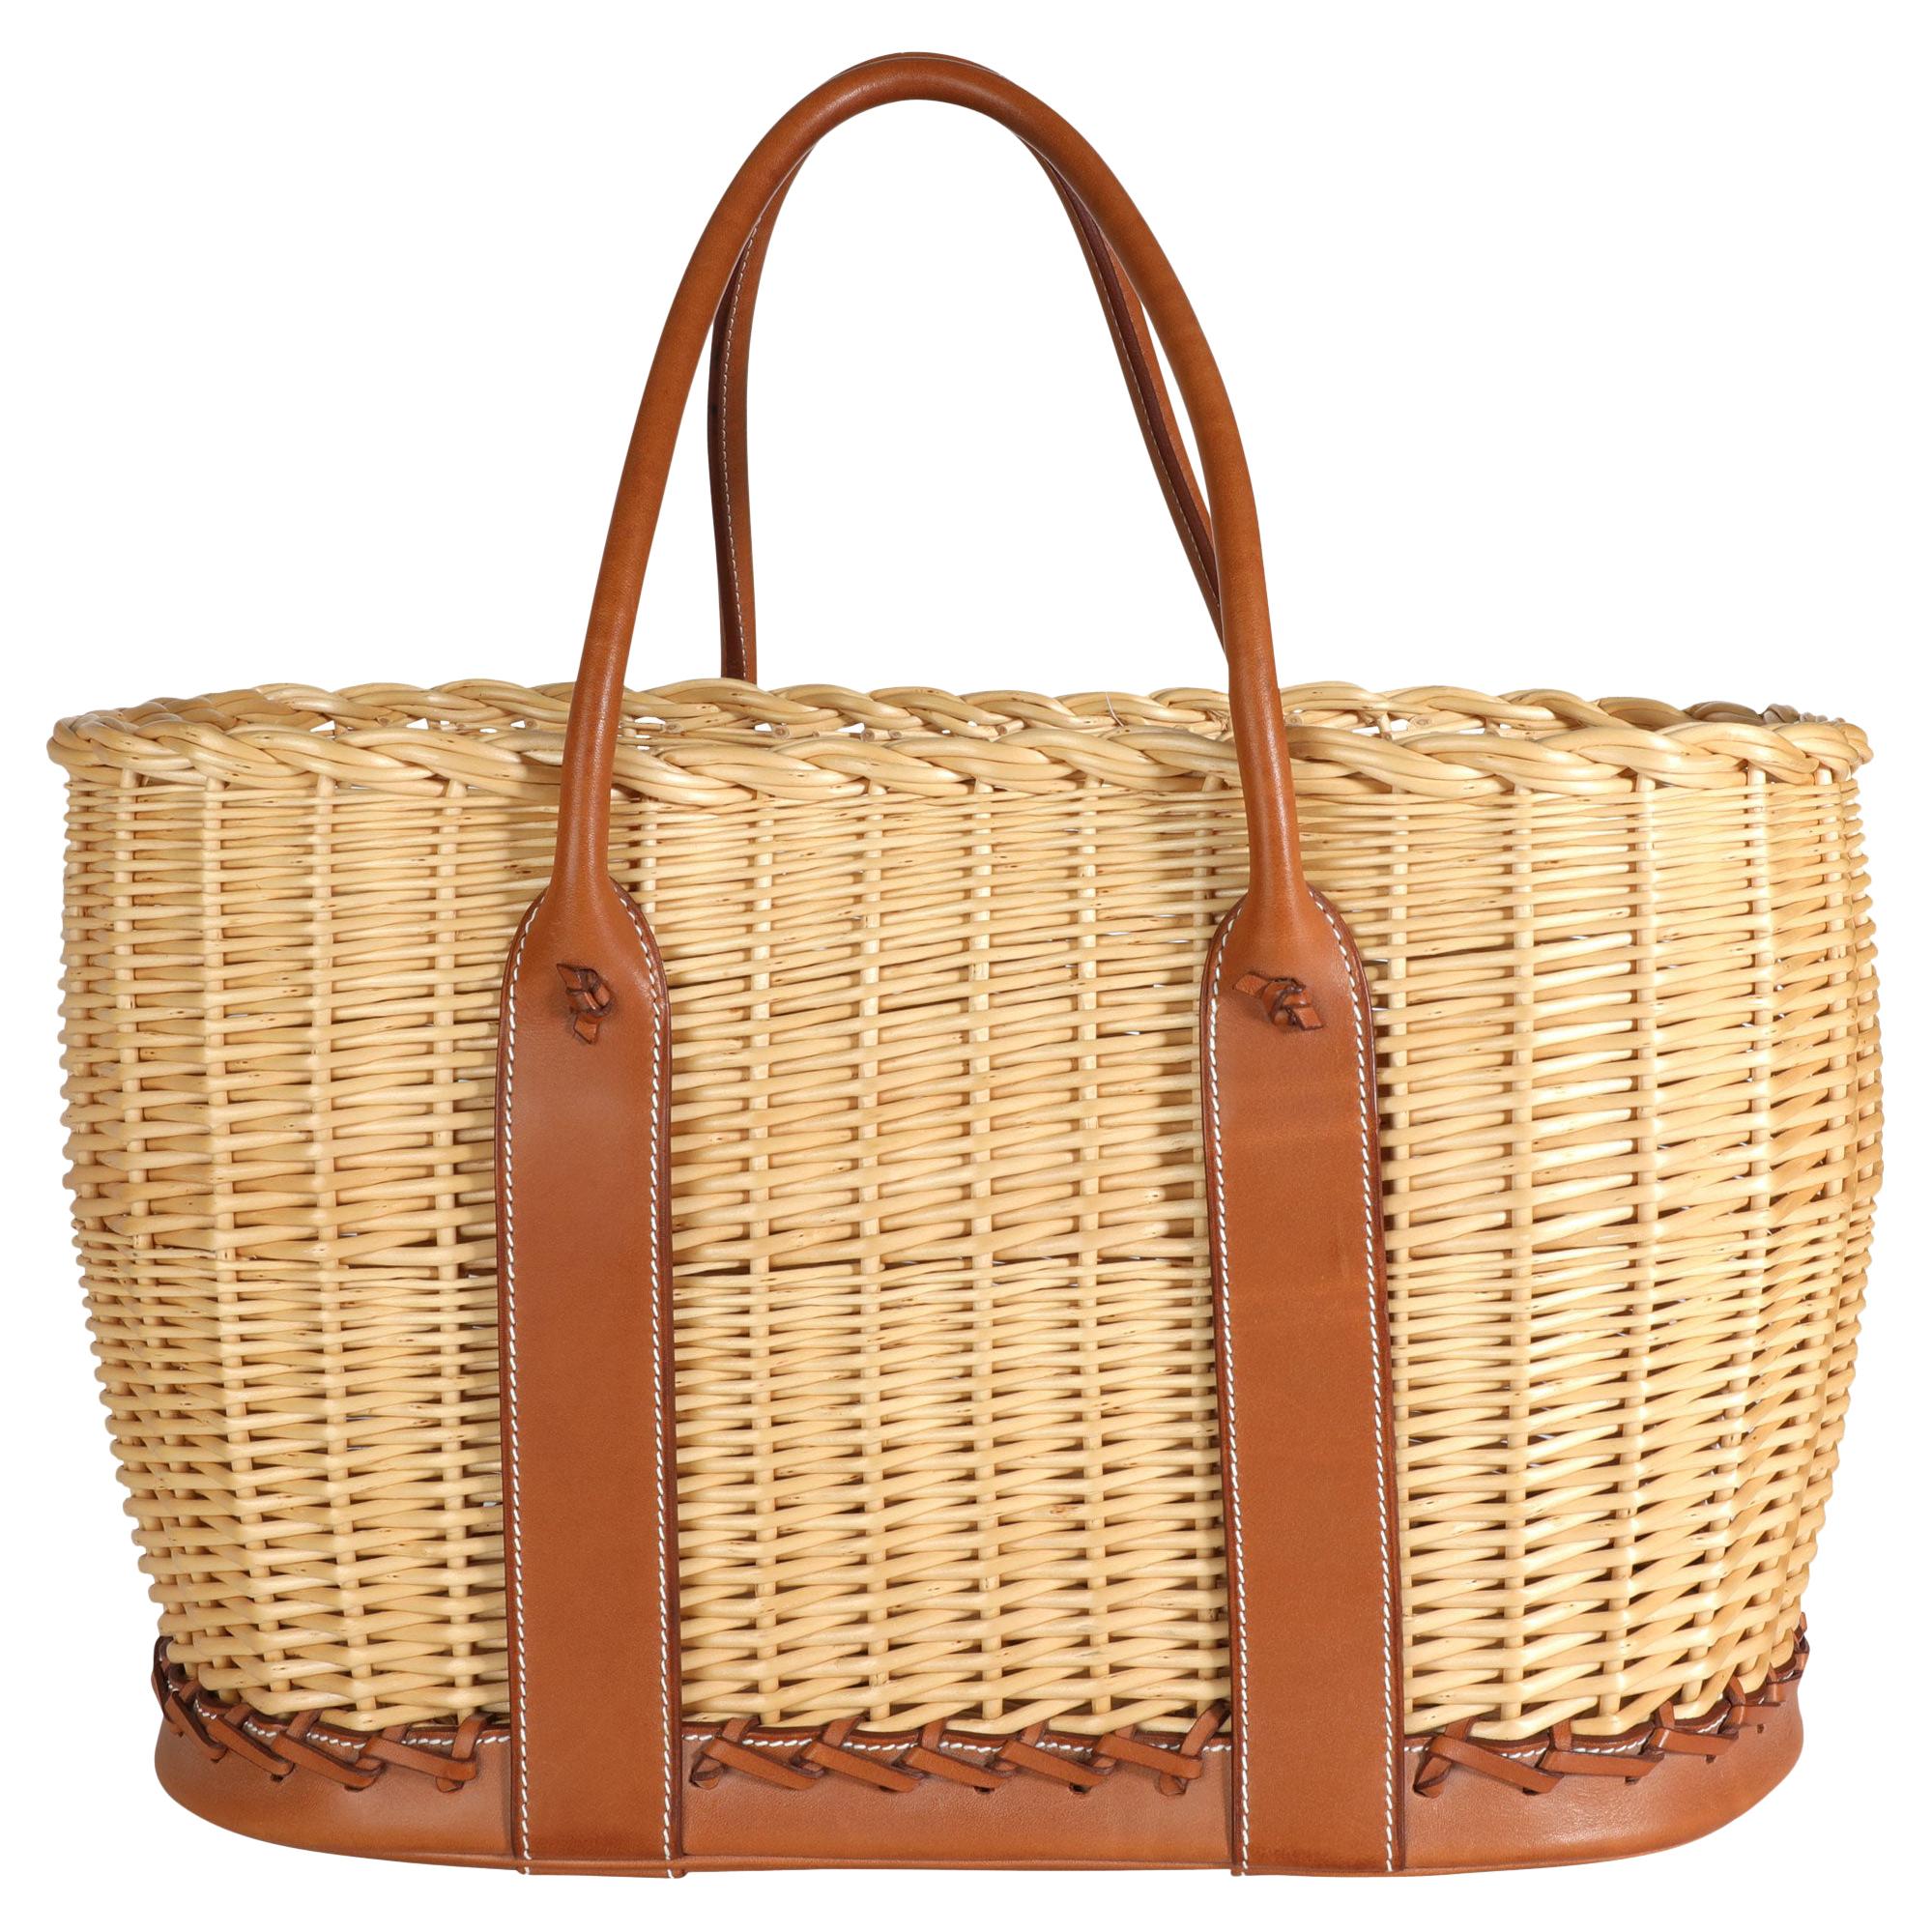 HERMES Garden Party 36 Tote in burgundy canvas and brown leather at 1stDibs